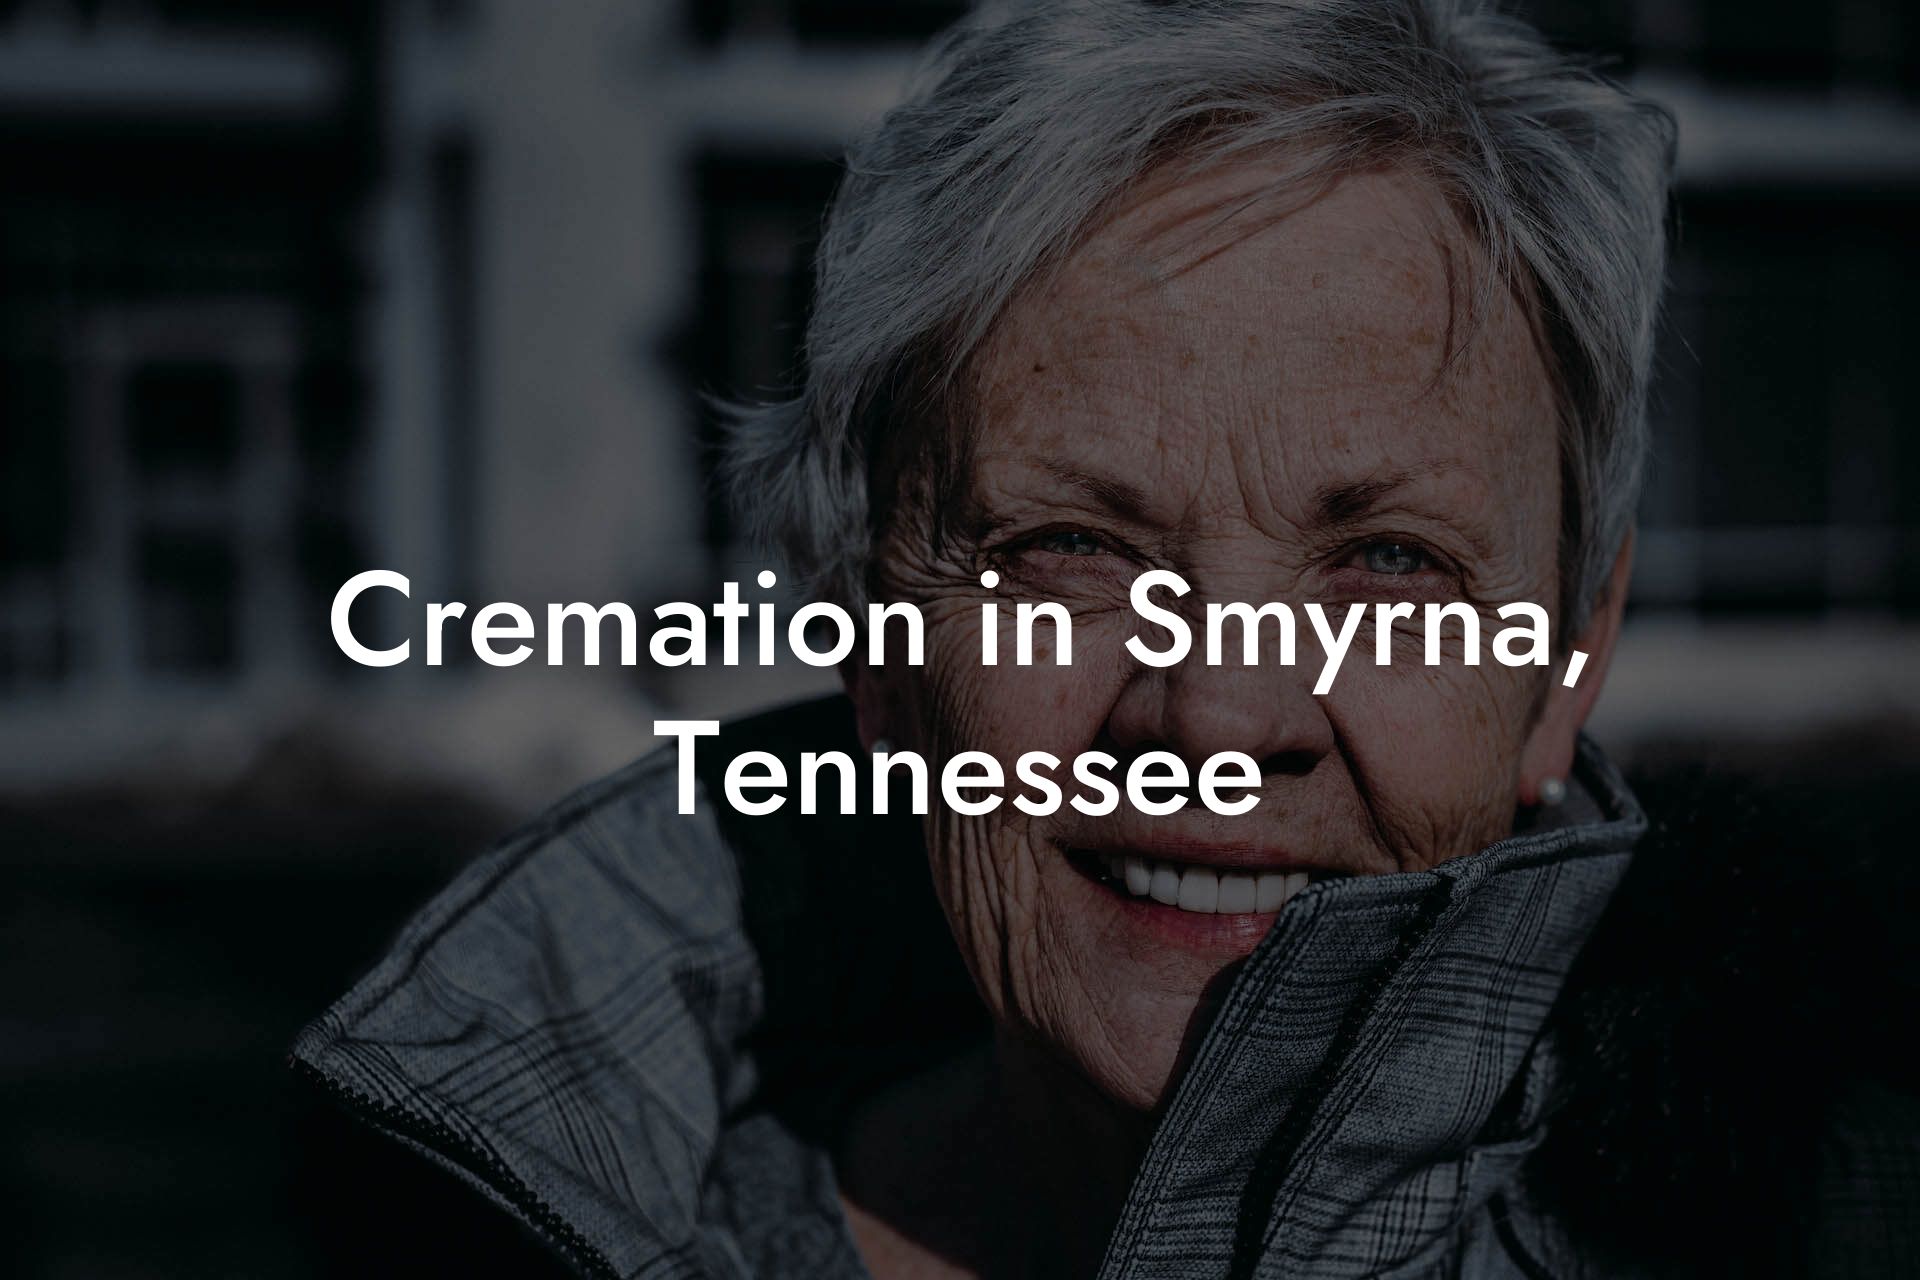 Cremation in Smyrna, Tennessee